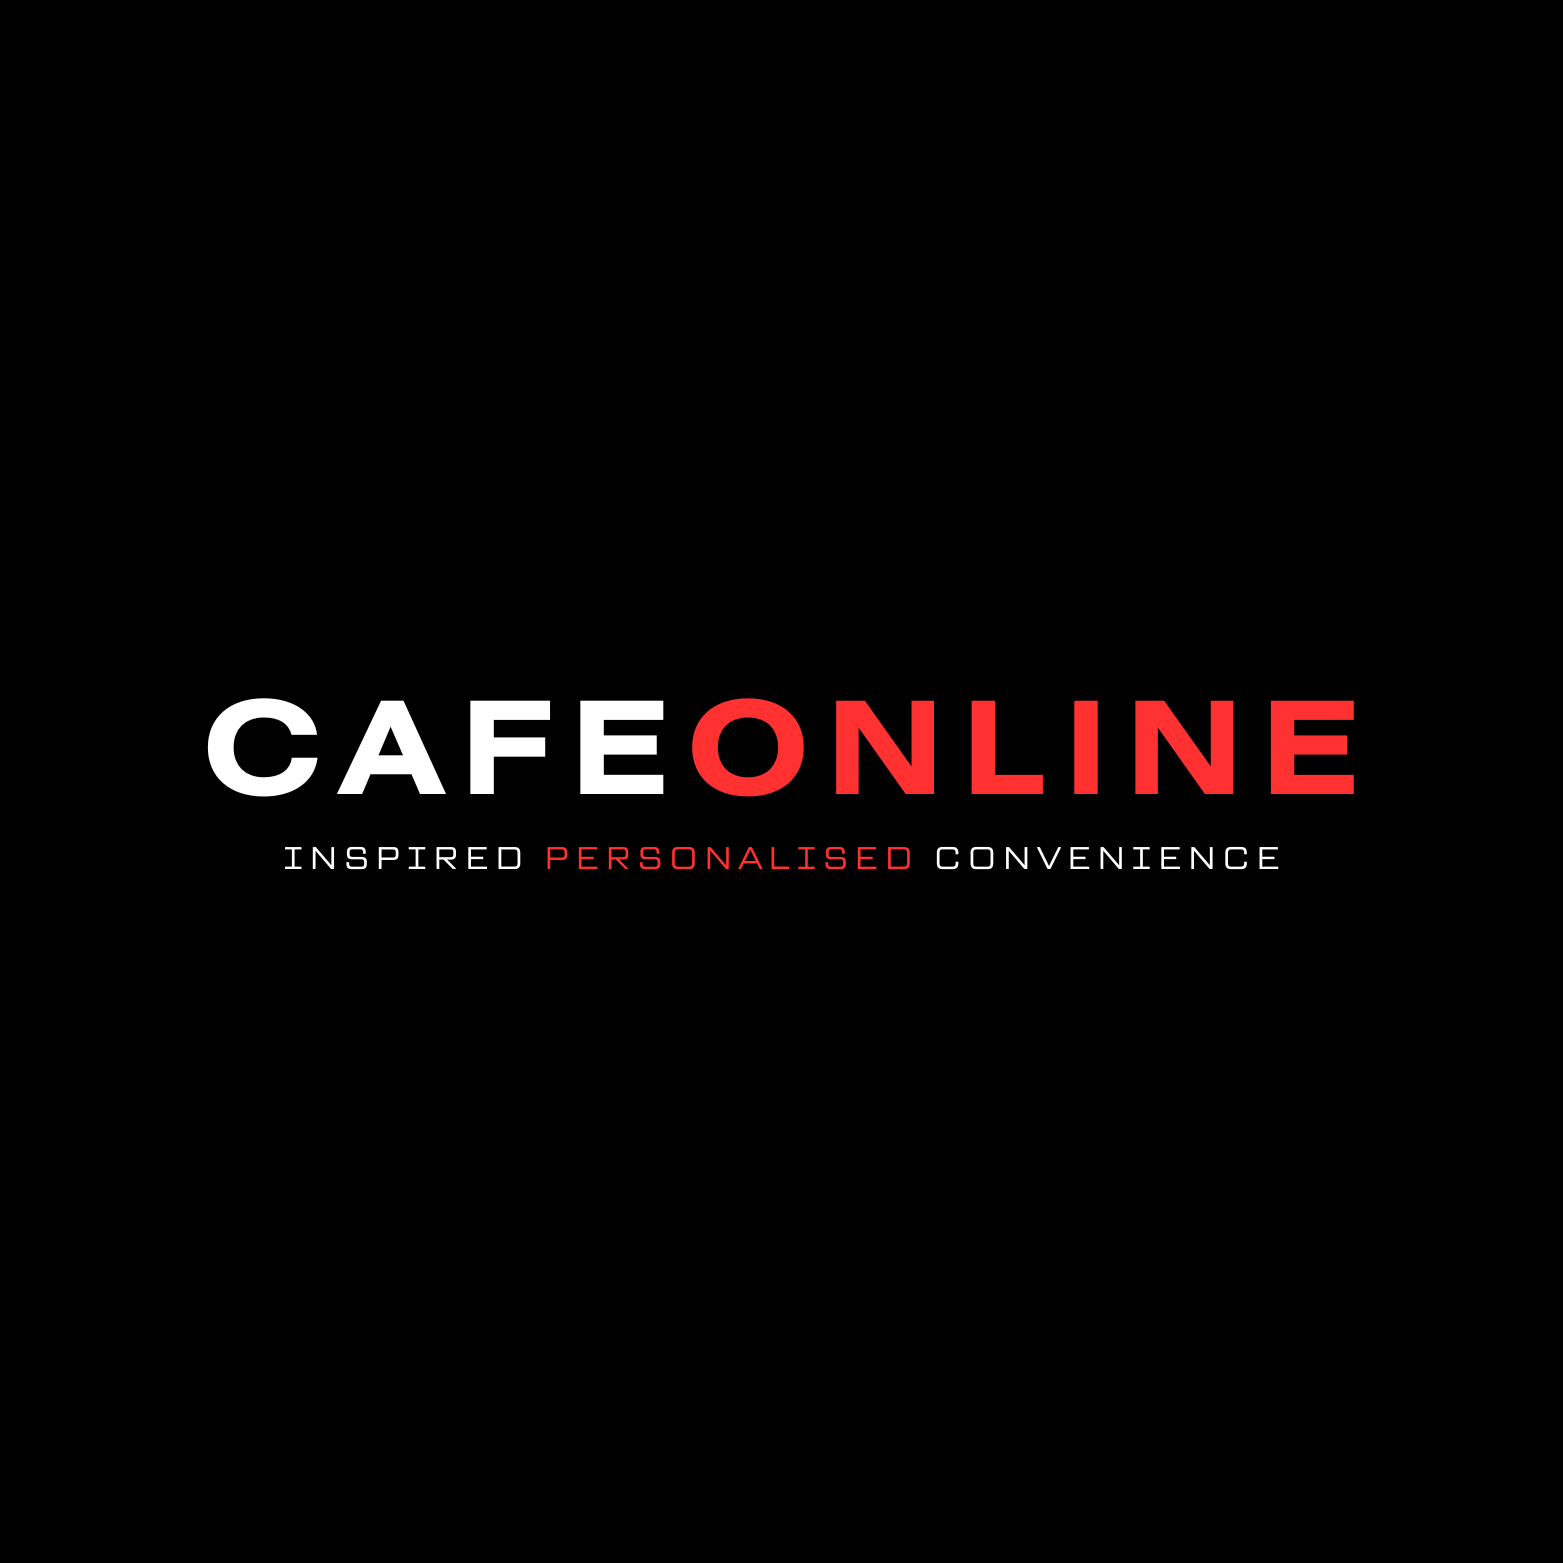 CAFEONLINE.png